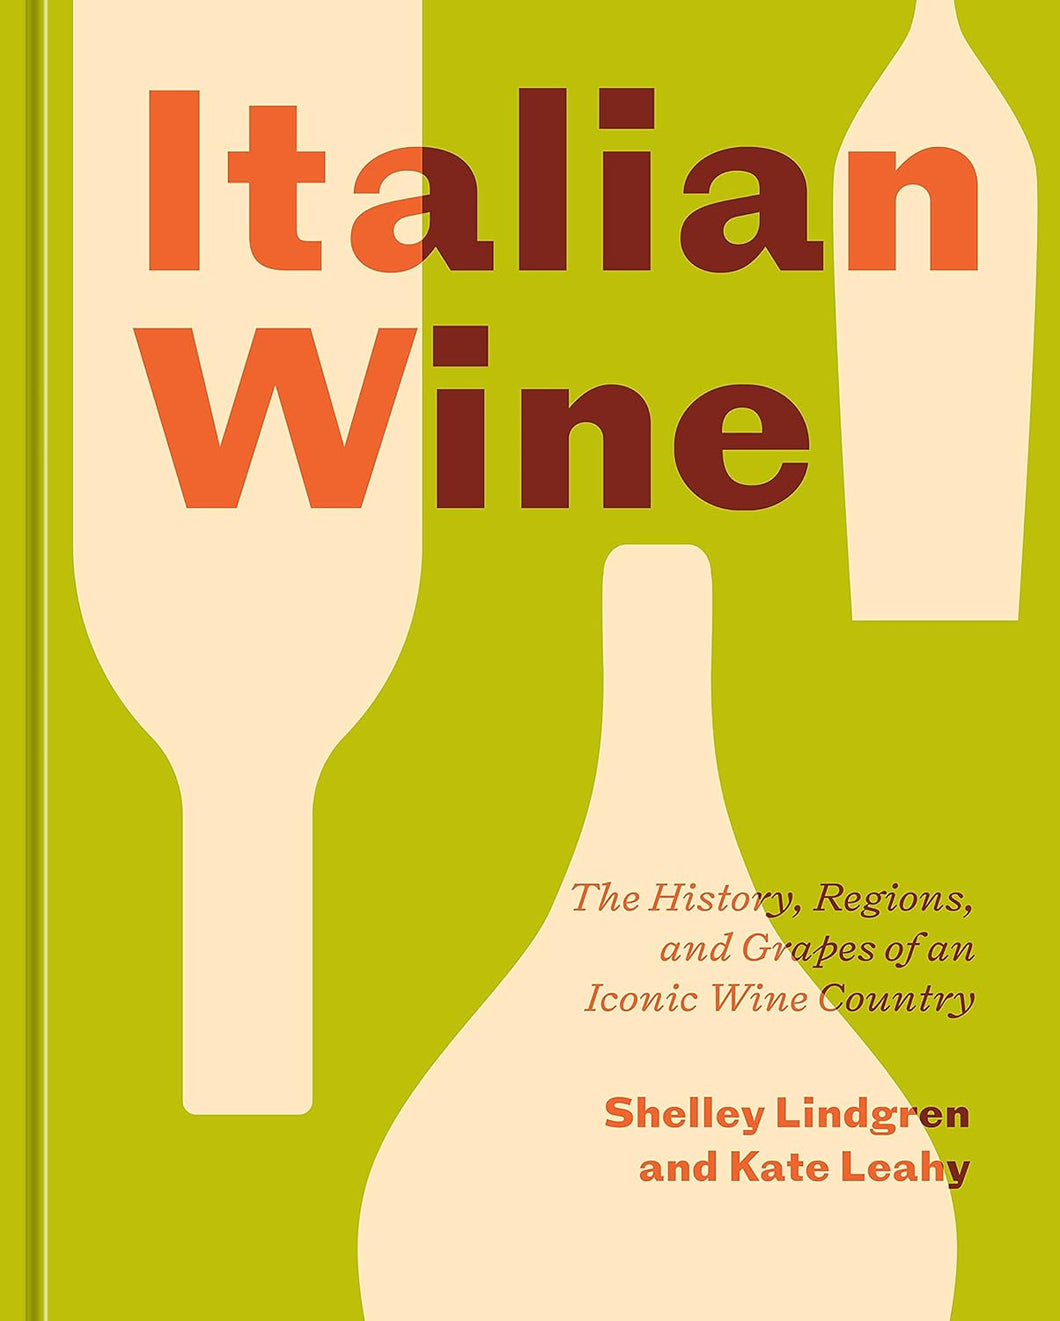 Italian Wine: The History, Regions, and Grapes of an Iconic Wine Country by Shelley Lindgren and Kate Leahy